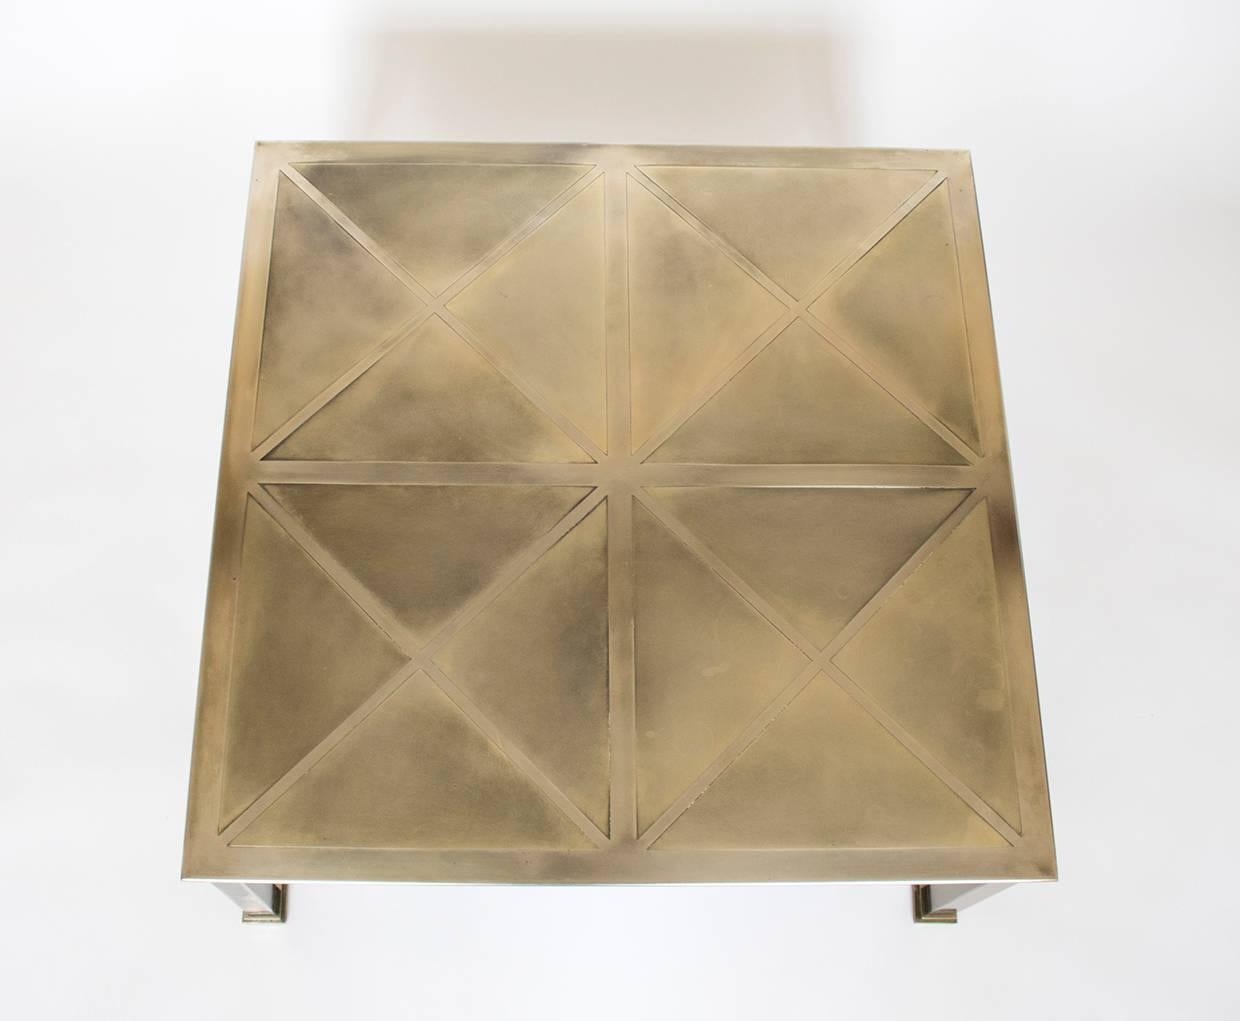 French Mid-Century Modern Brushed Brass Coffee Table, Gabriella Crespi Geometric Style For Sale